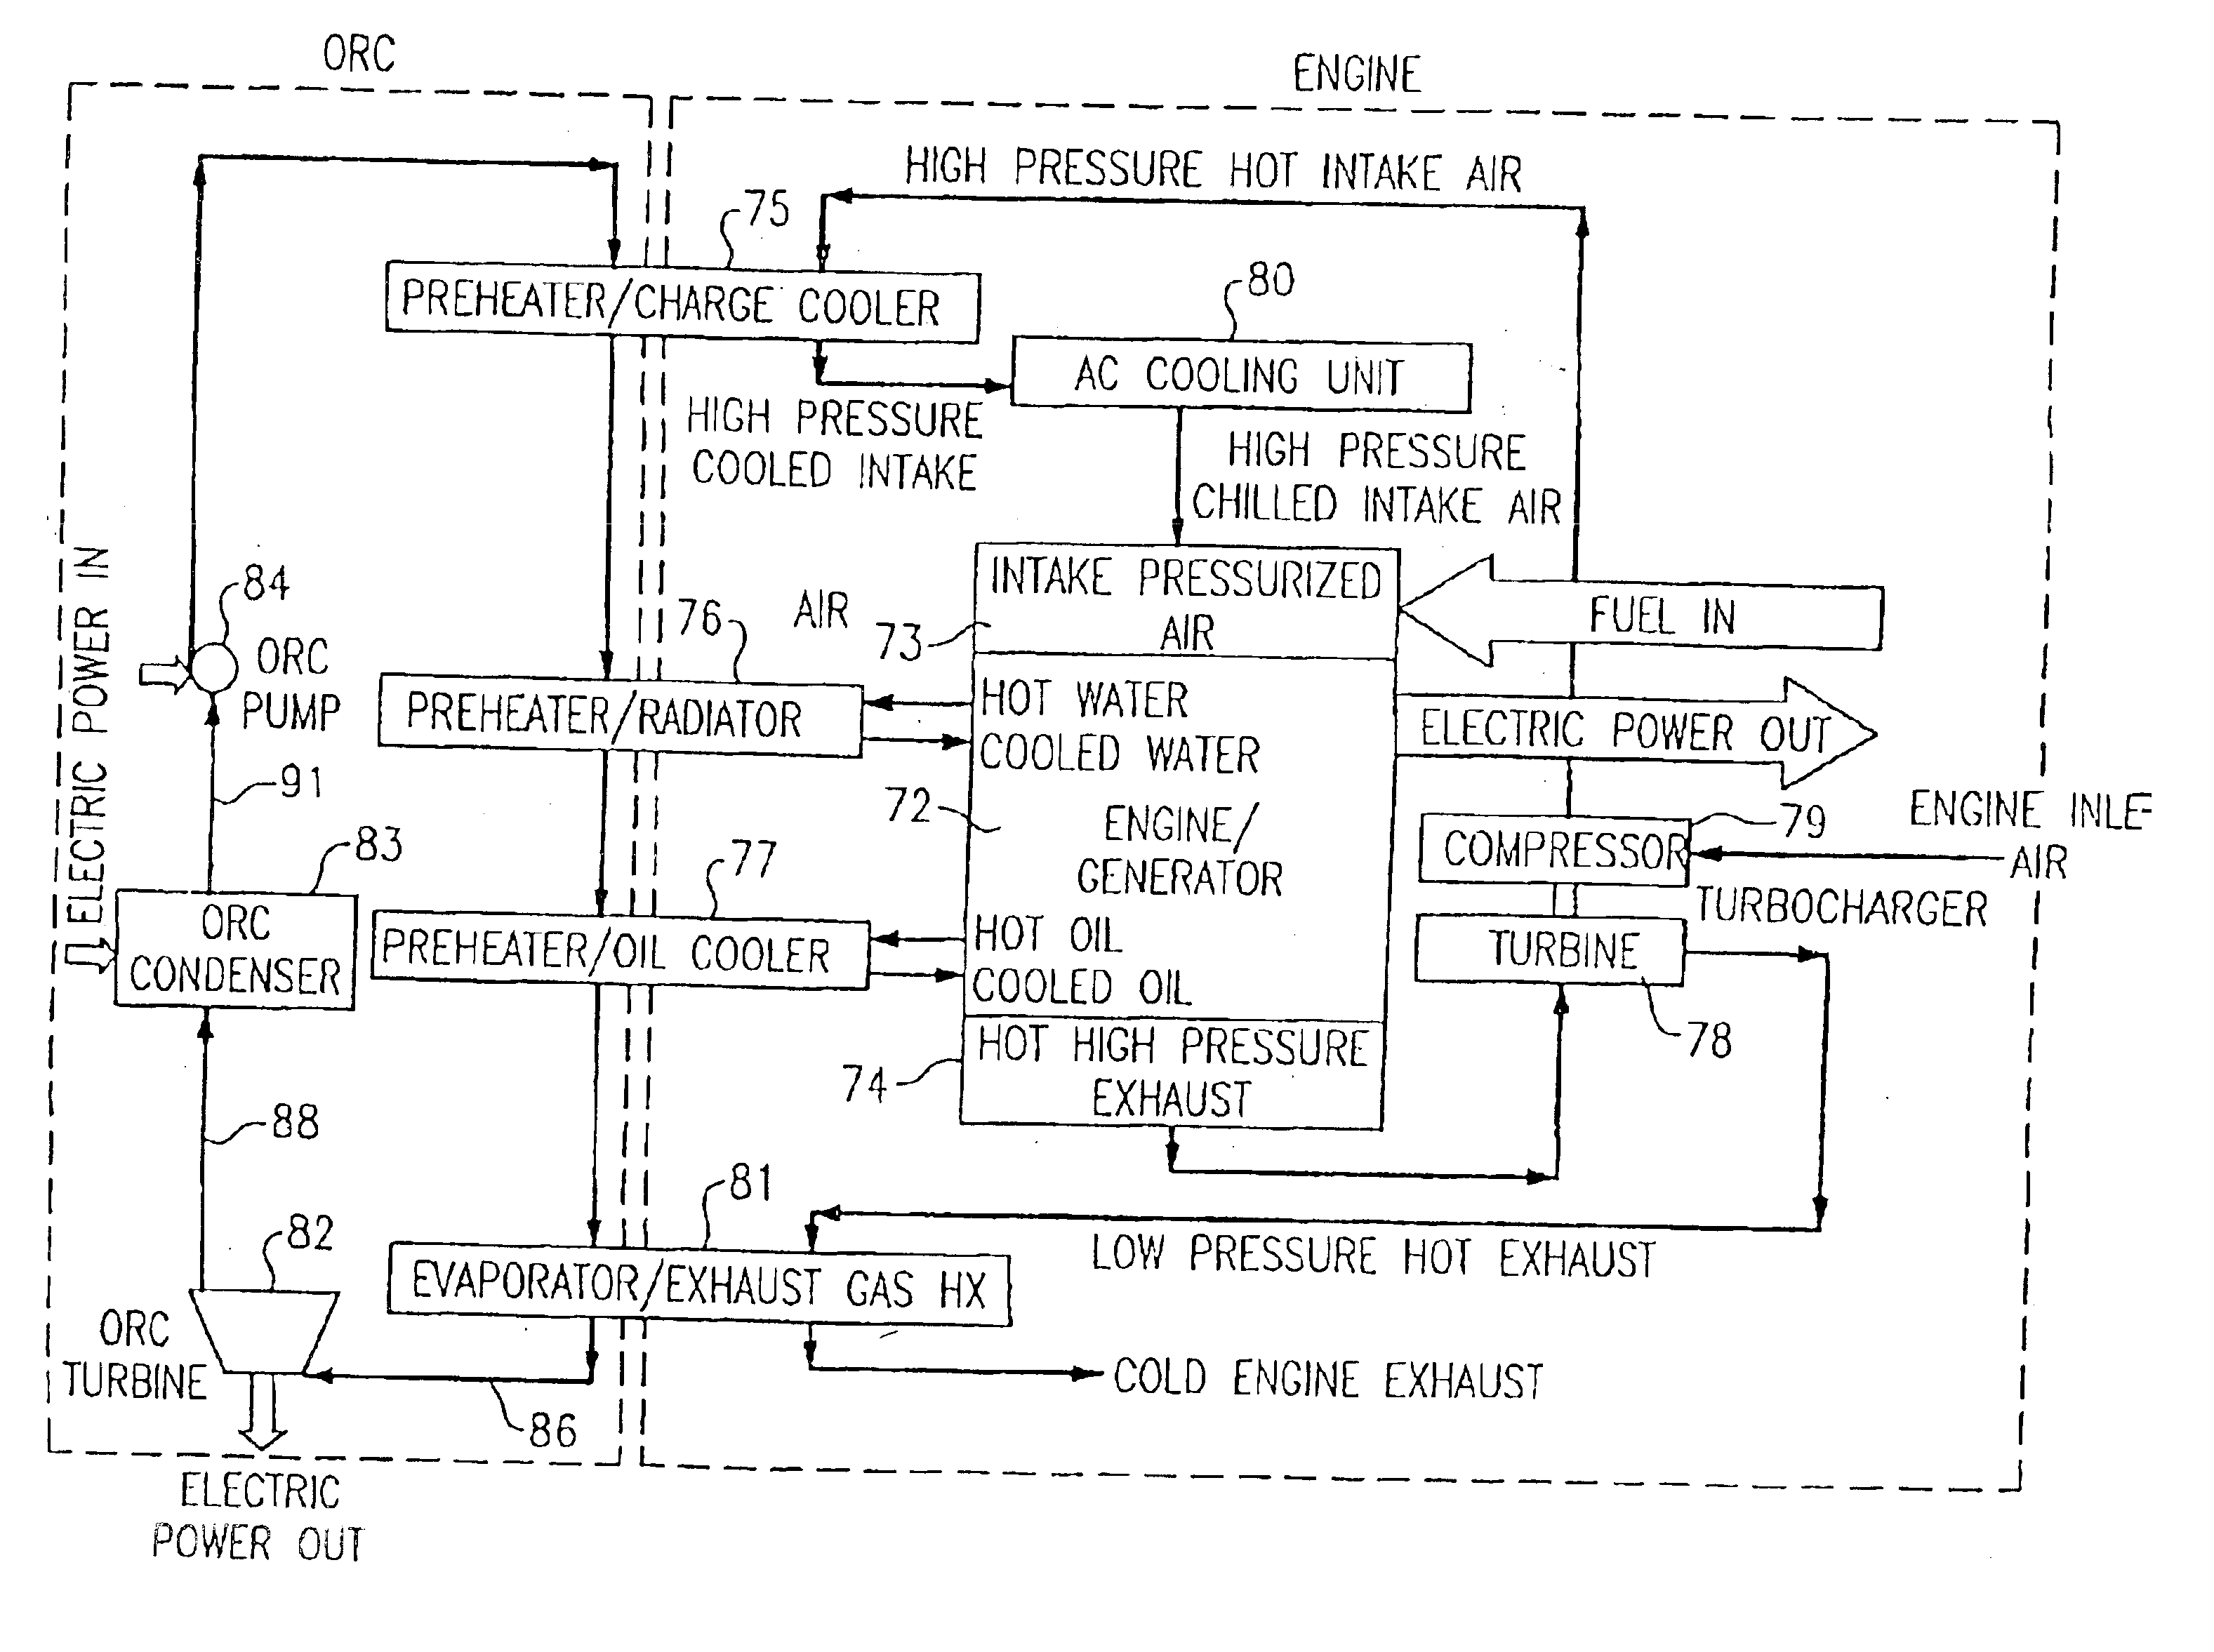 Combined rankine and vapor compression cycles